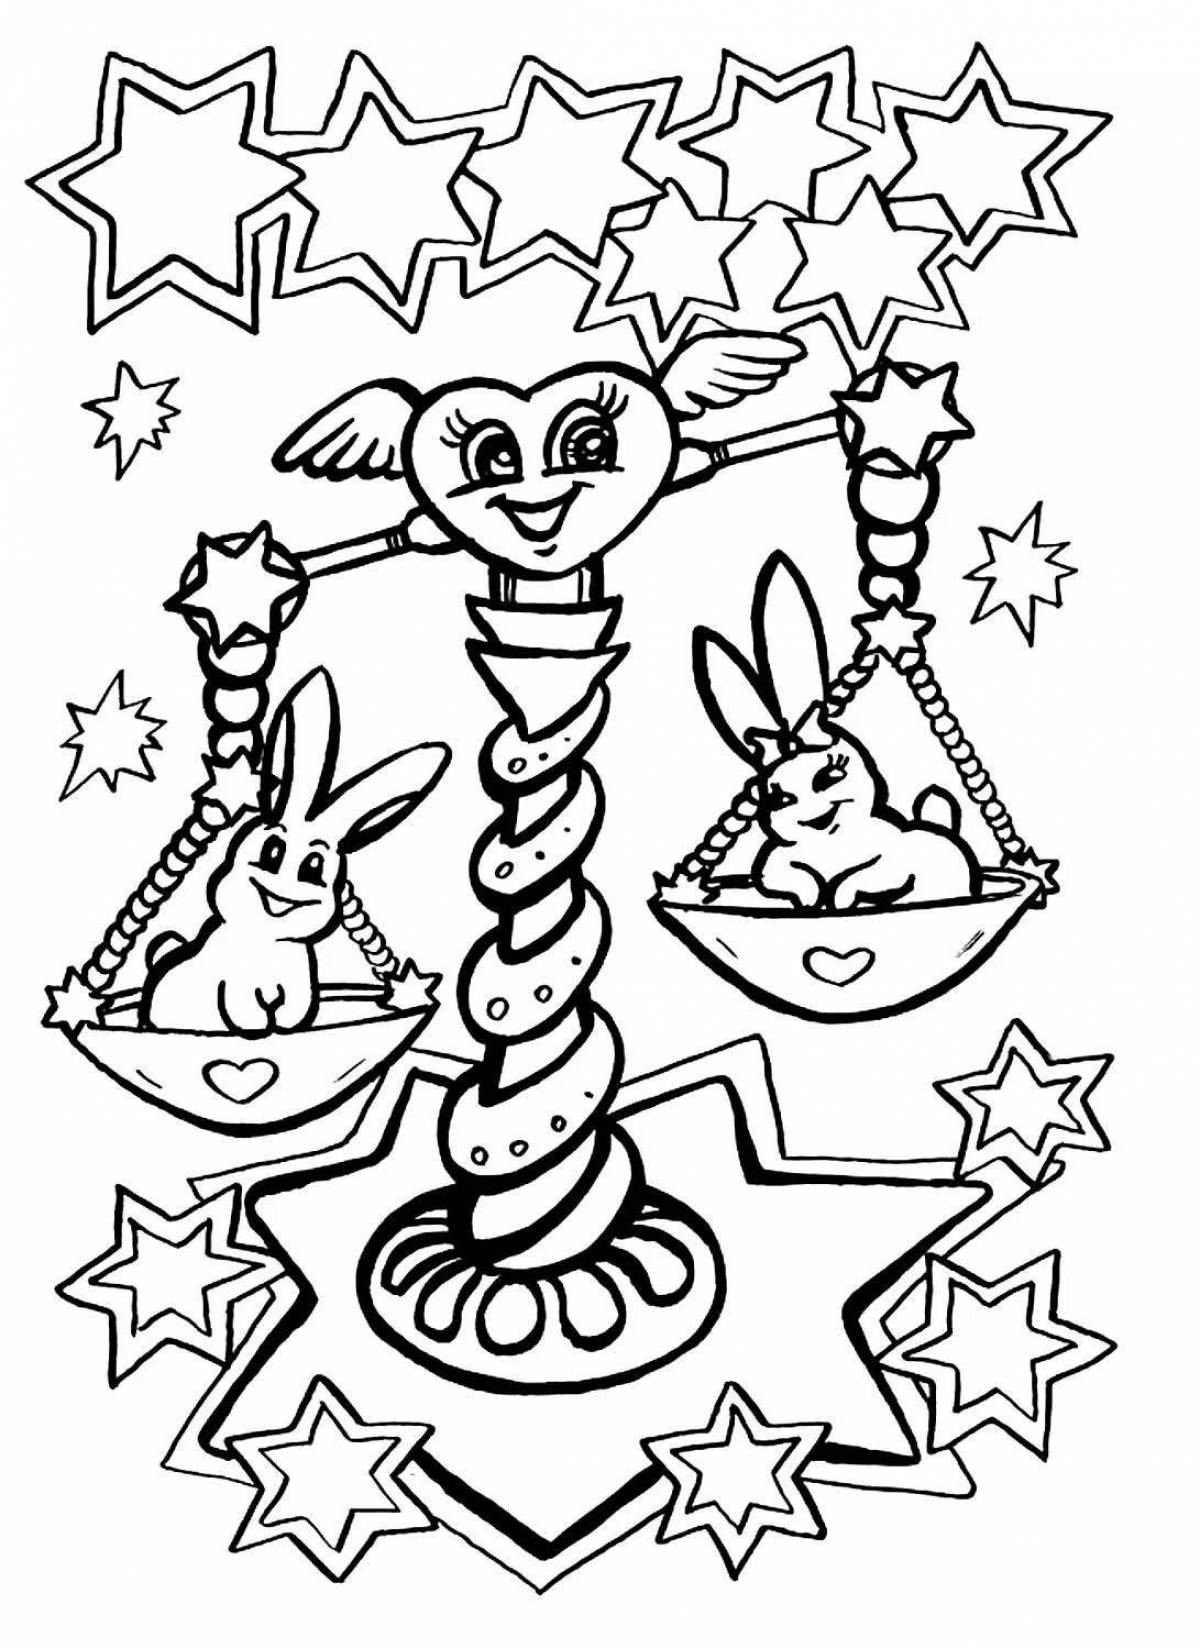 Playful scale coloring page